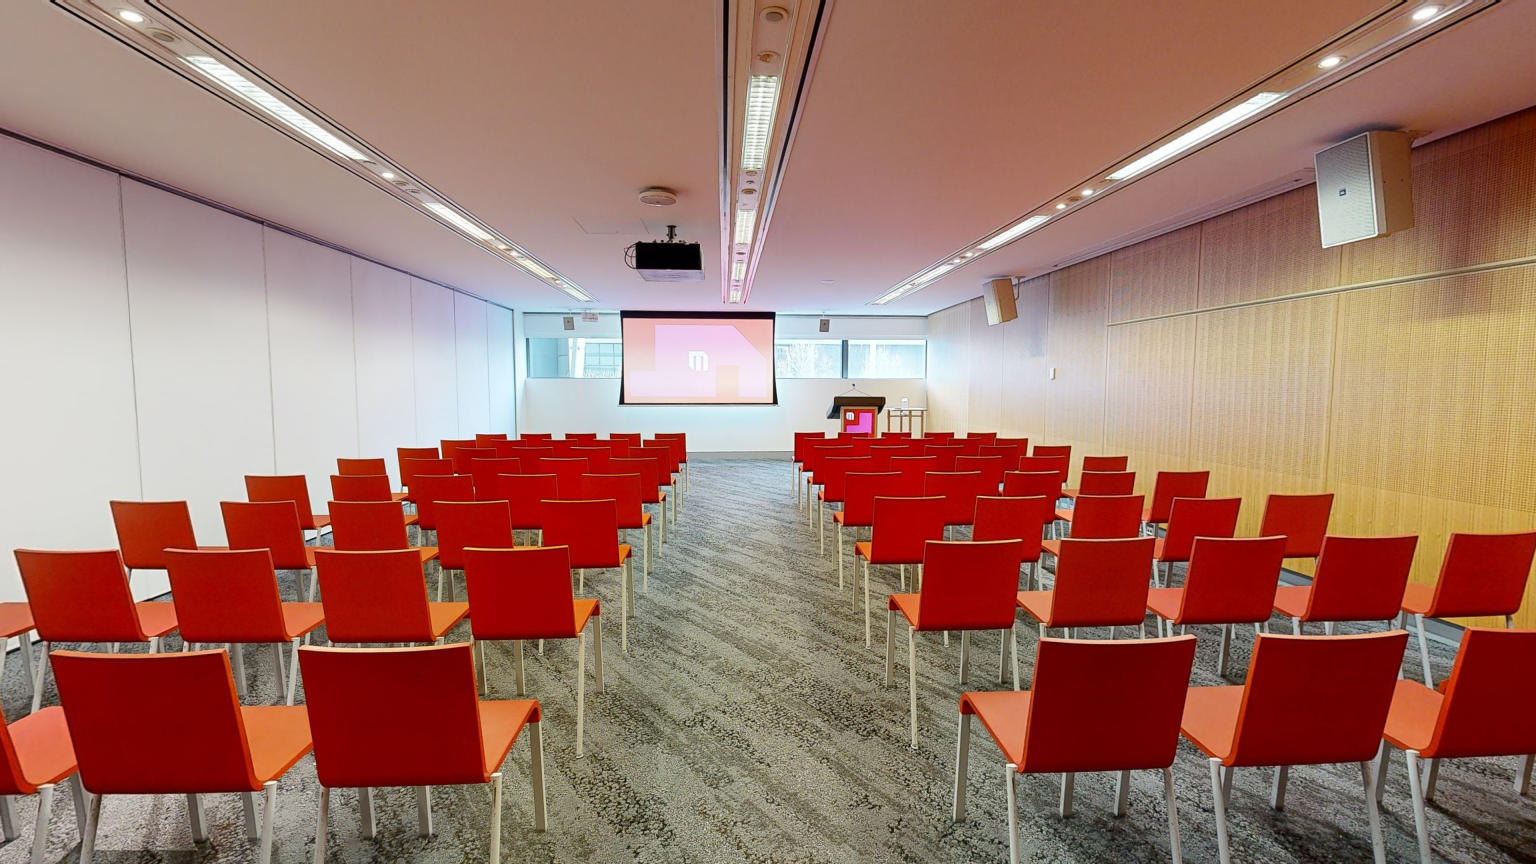 Conference or meeting room with orange chairs set up in rows facing a large projector screen with a strip of windows sitting behind at eye level. A lectern sits to the right of the screen. 